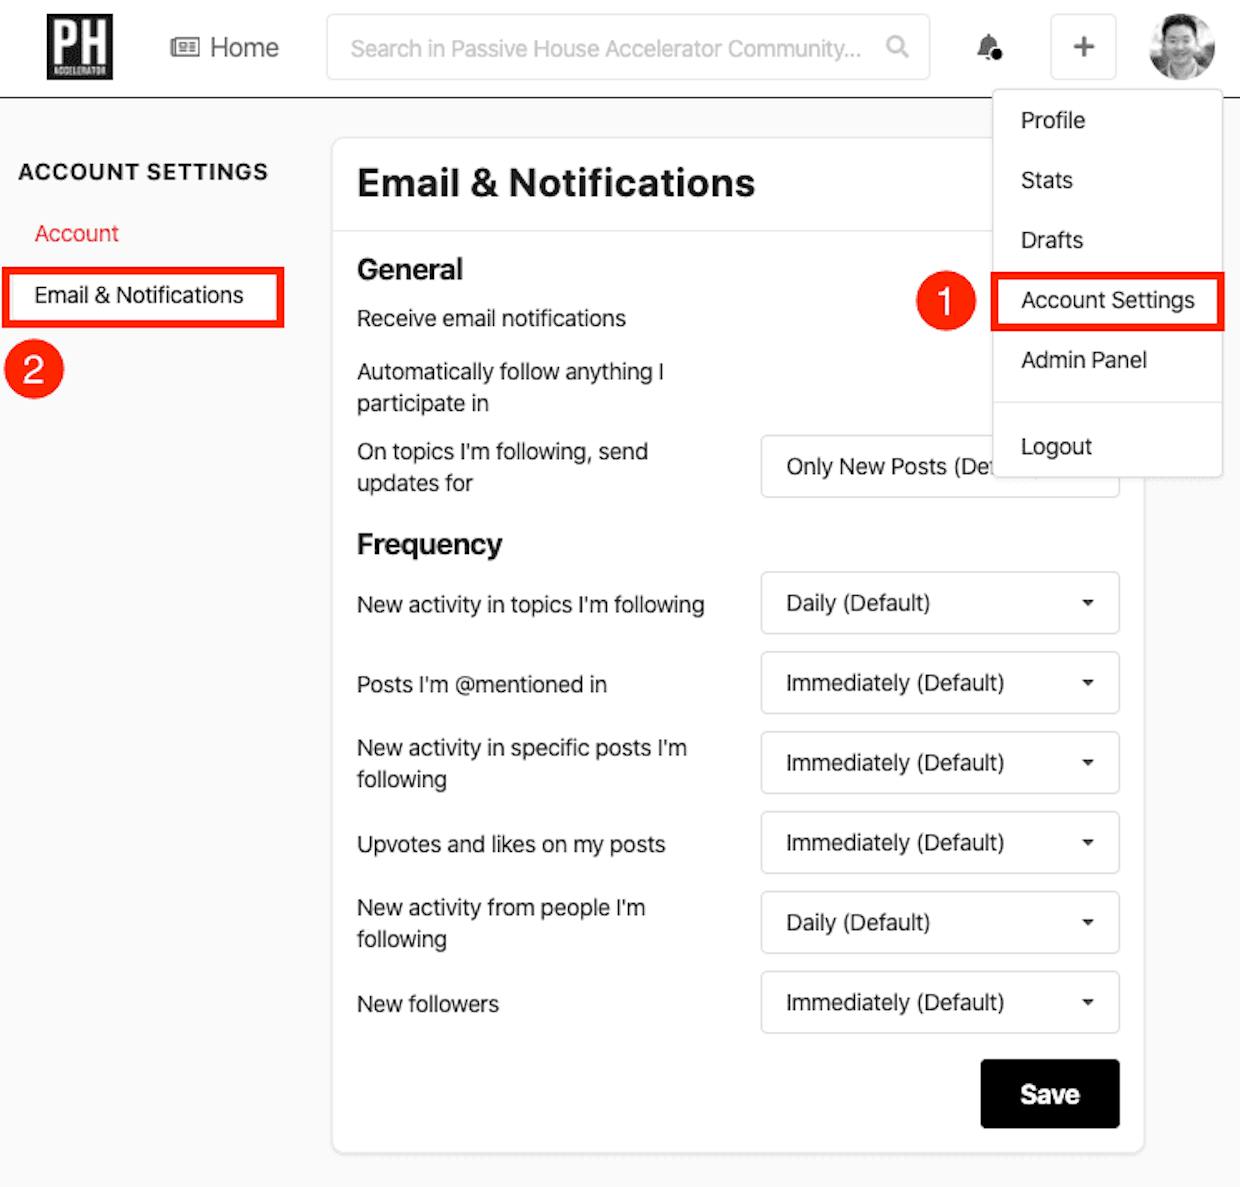 How do I manage the frequency of email notifications I receive?